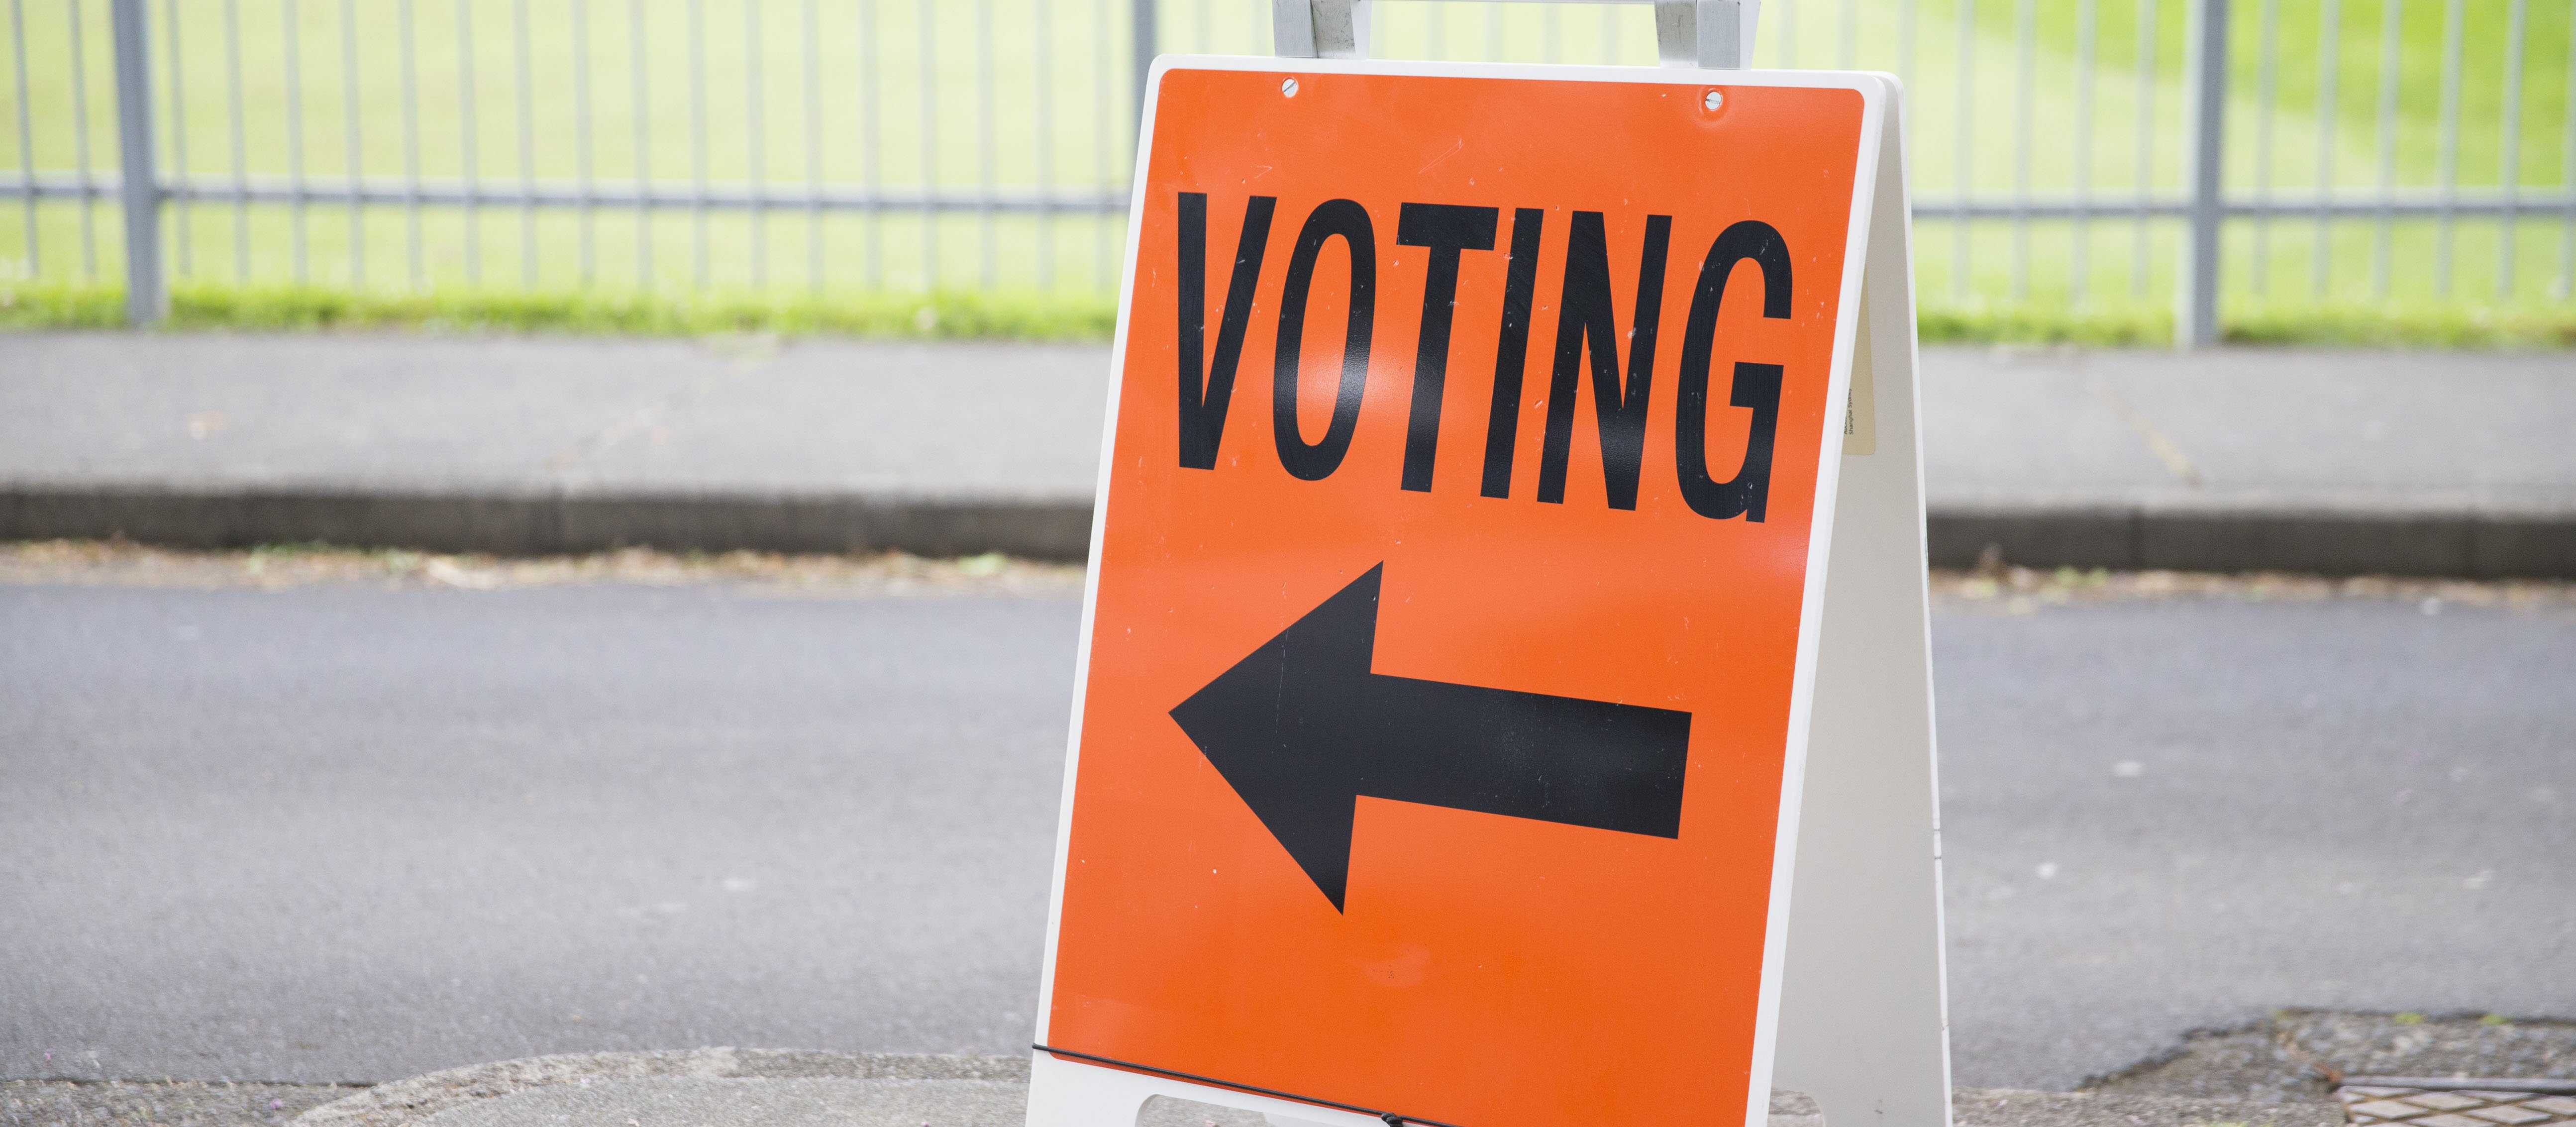 An orange voting sign on a street, with an arrow pointing the way